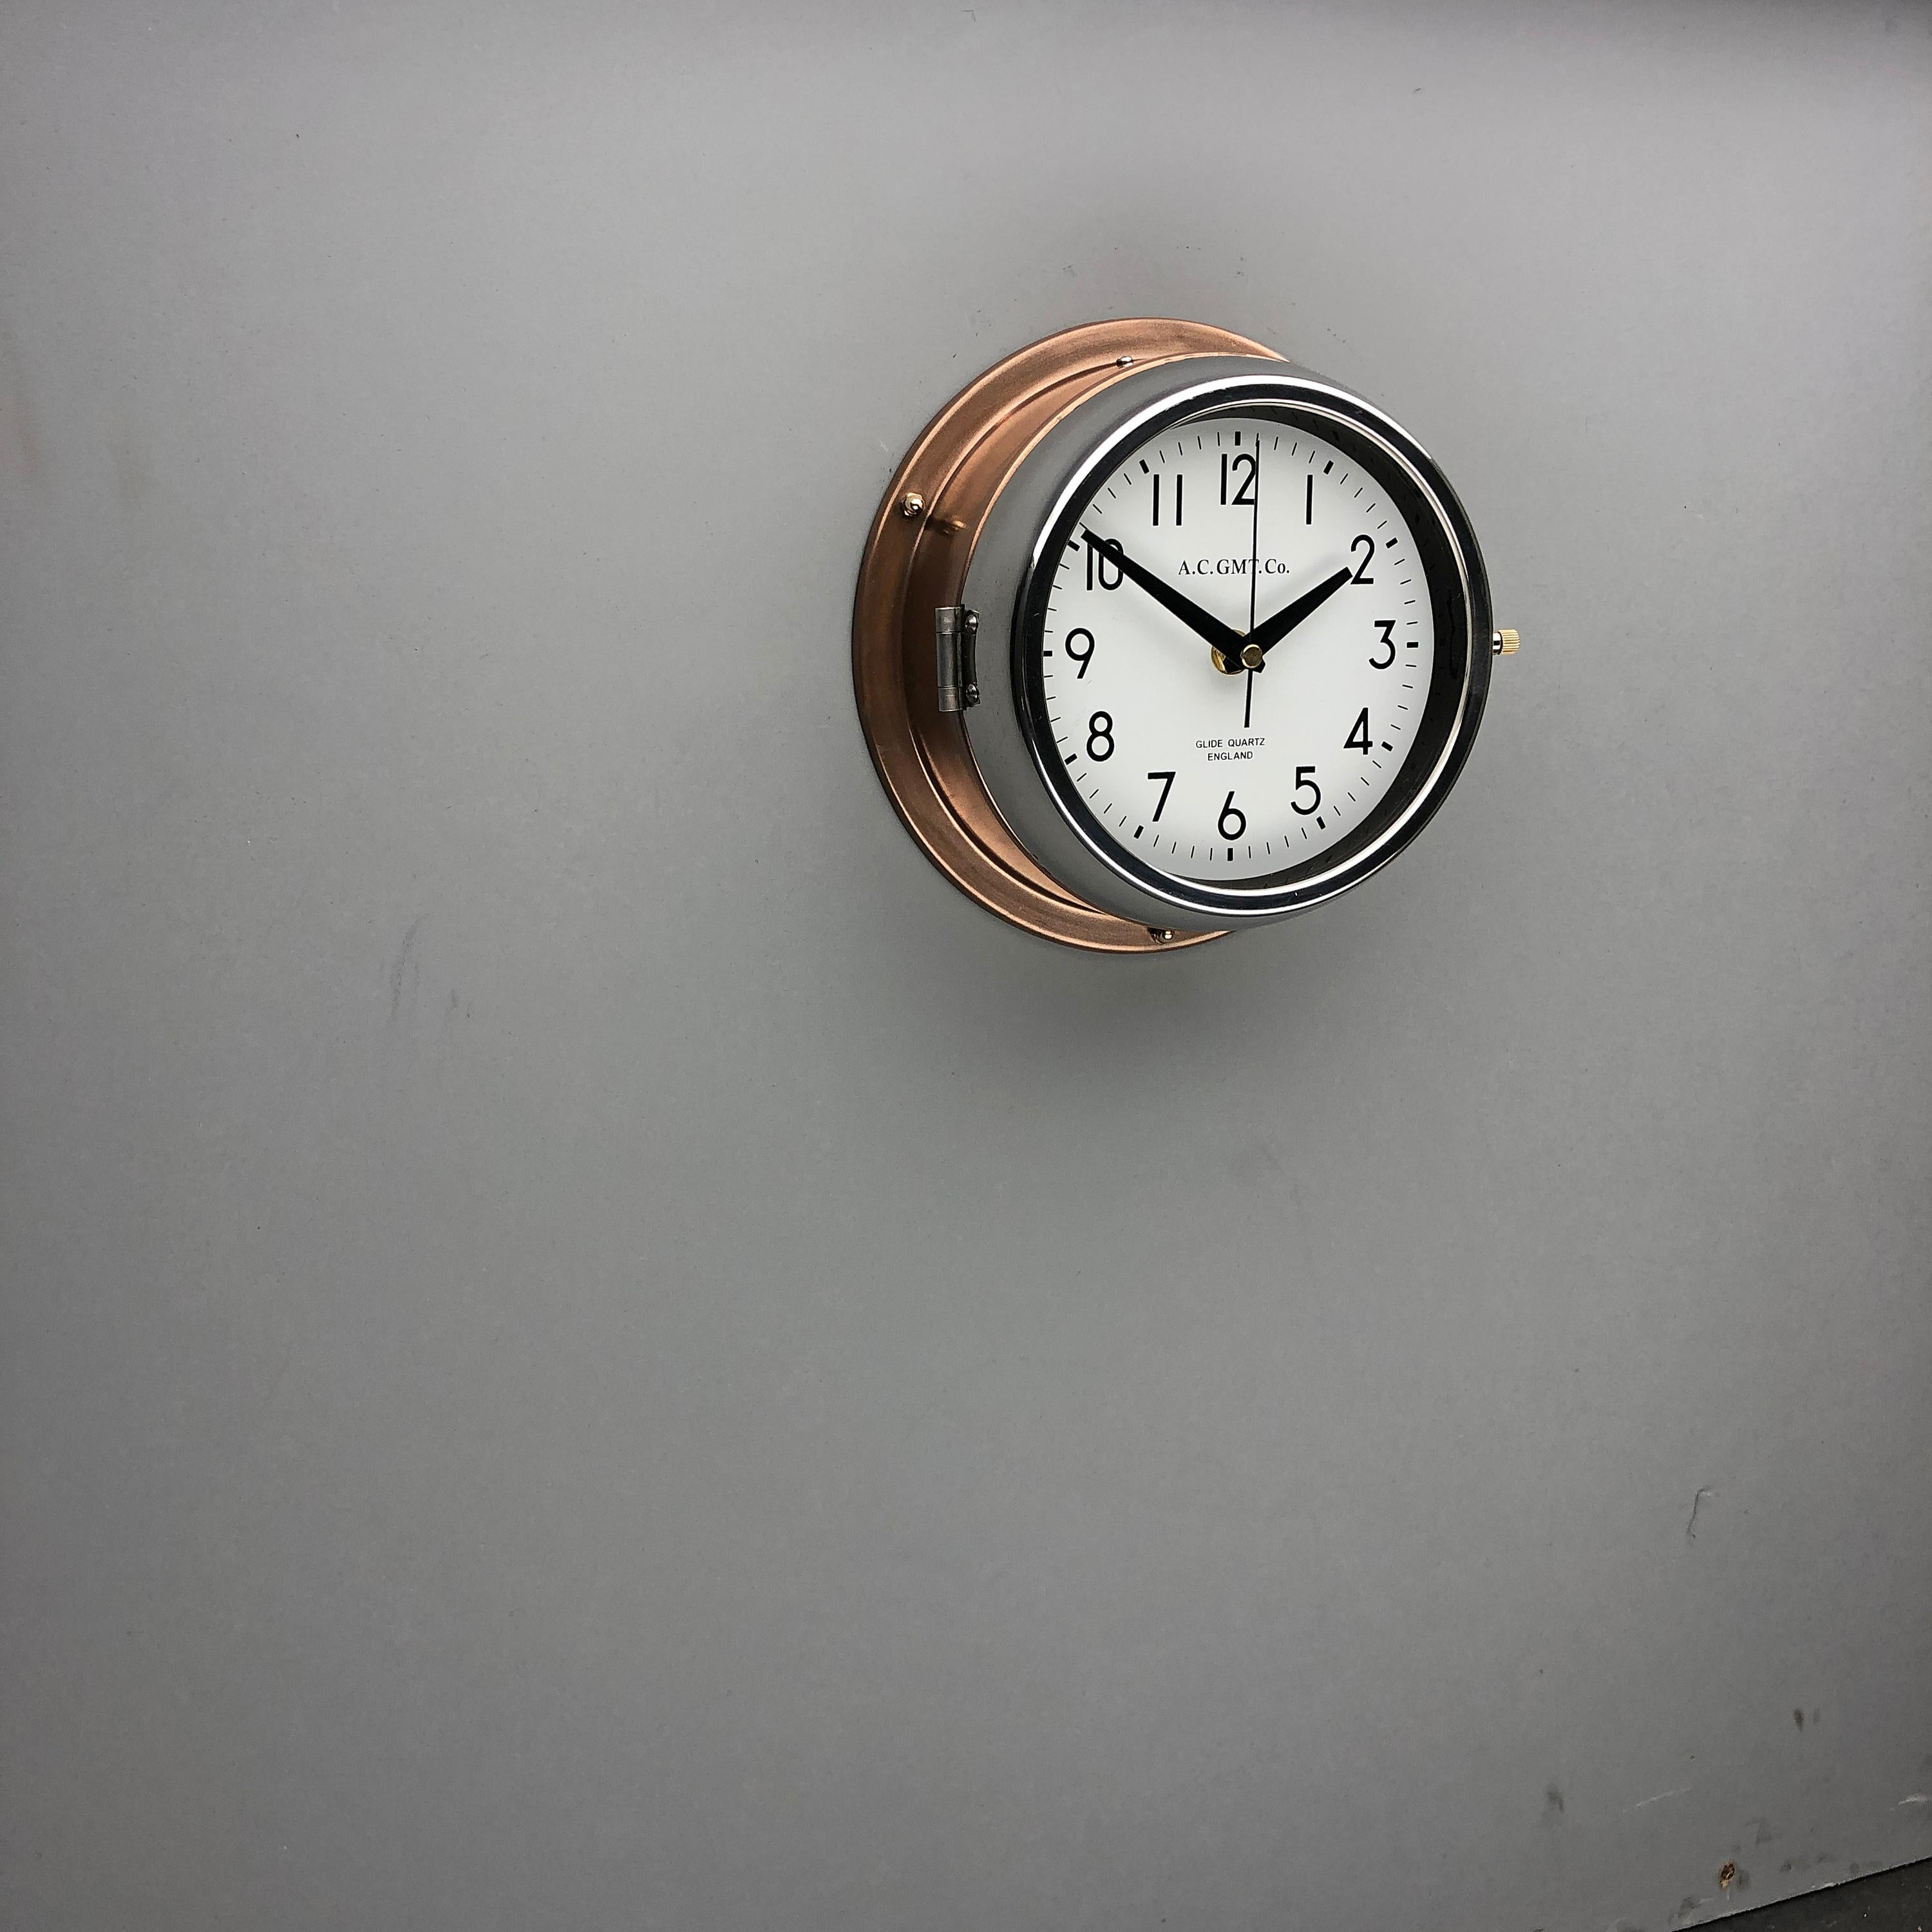 1970s British Bronze and Chrome AC GMT Co. Industrial Wall Clock White Dial 6